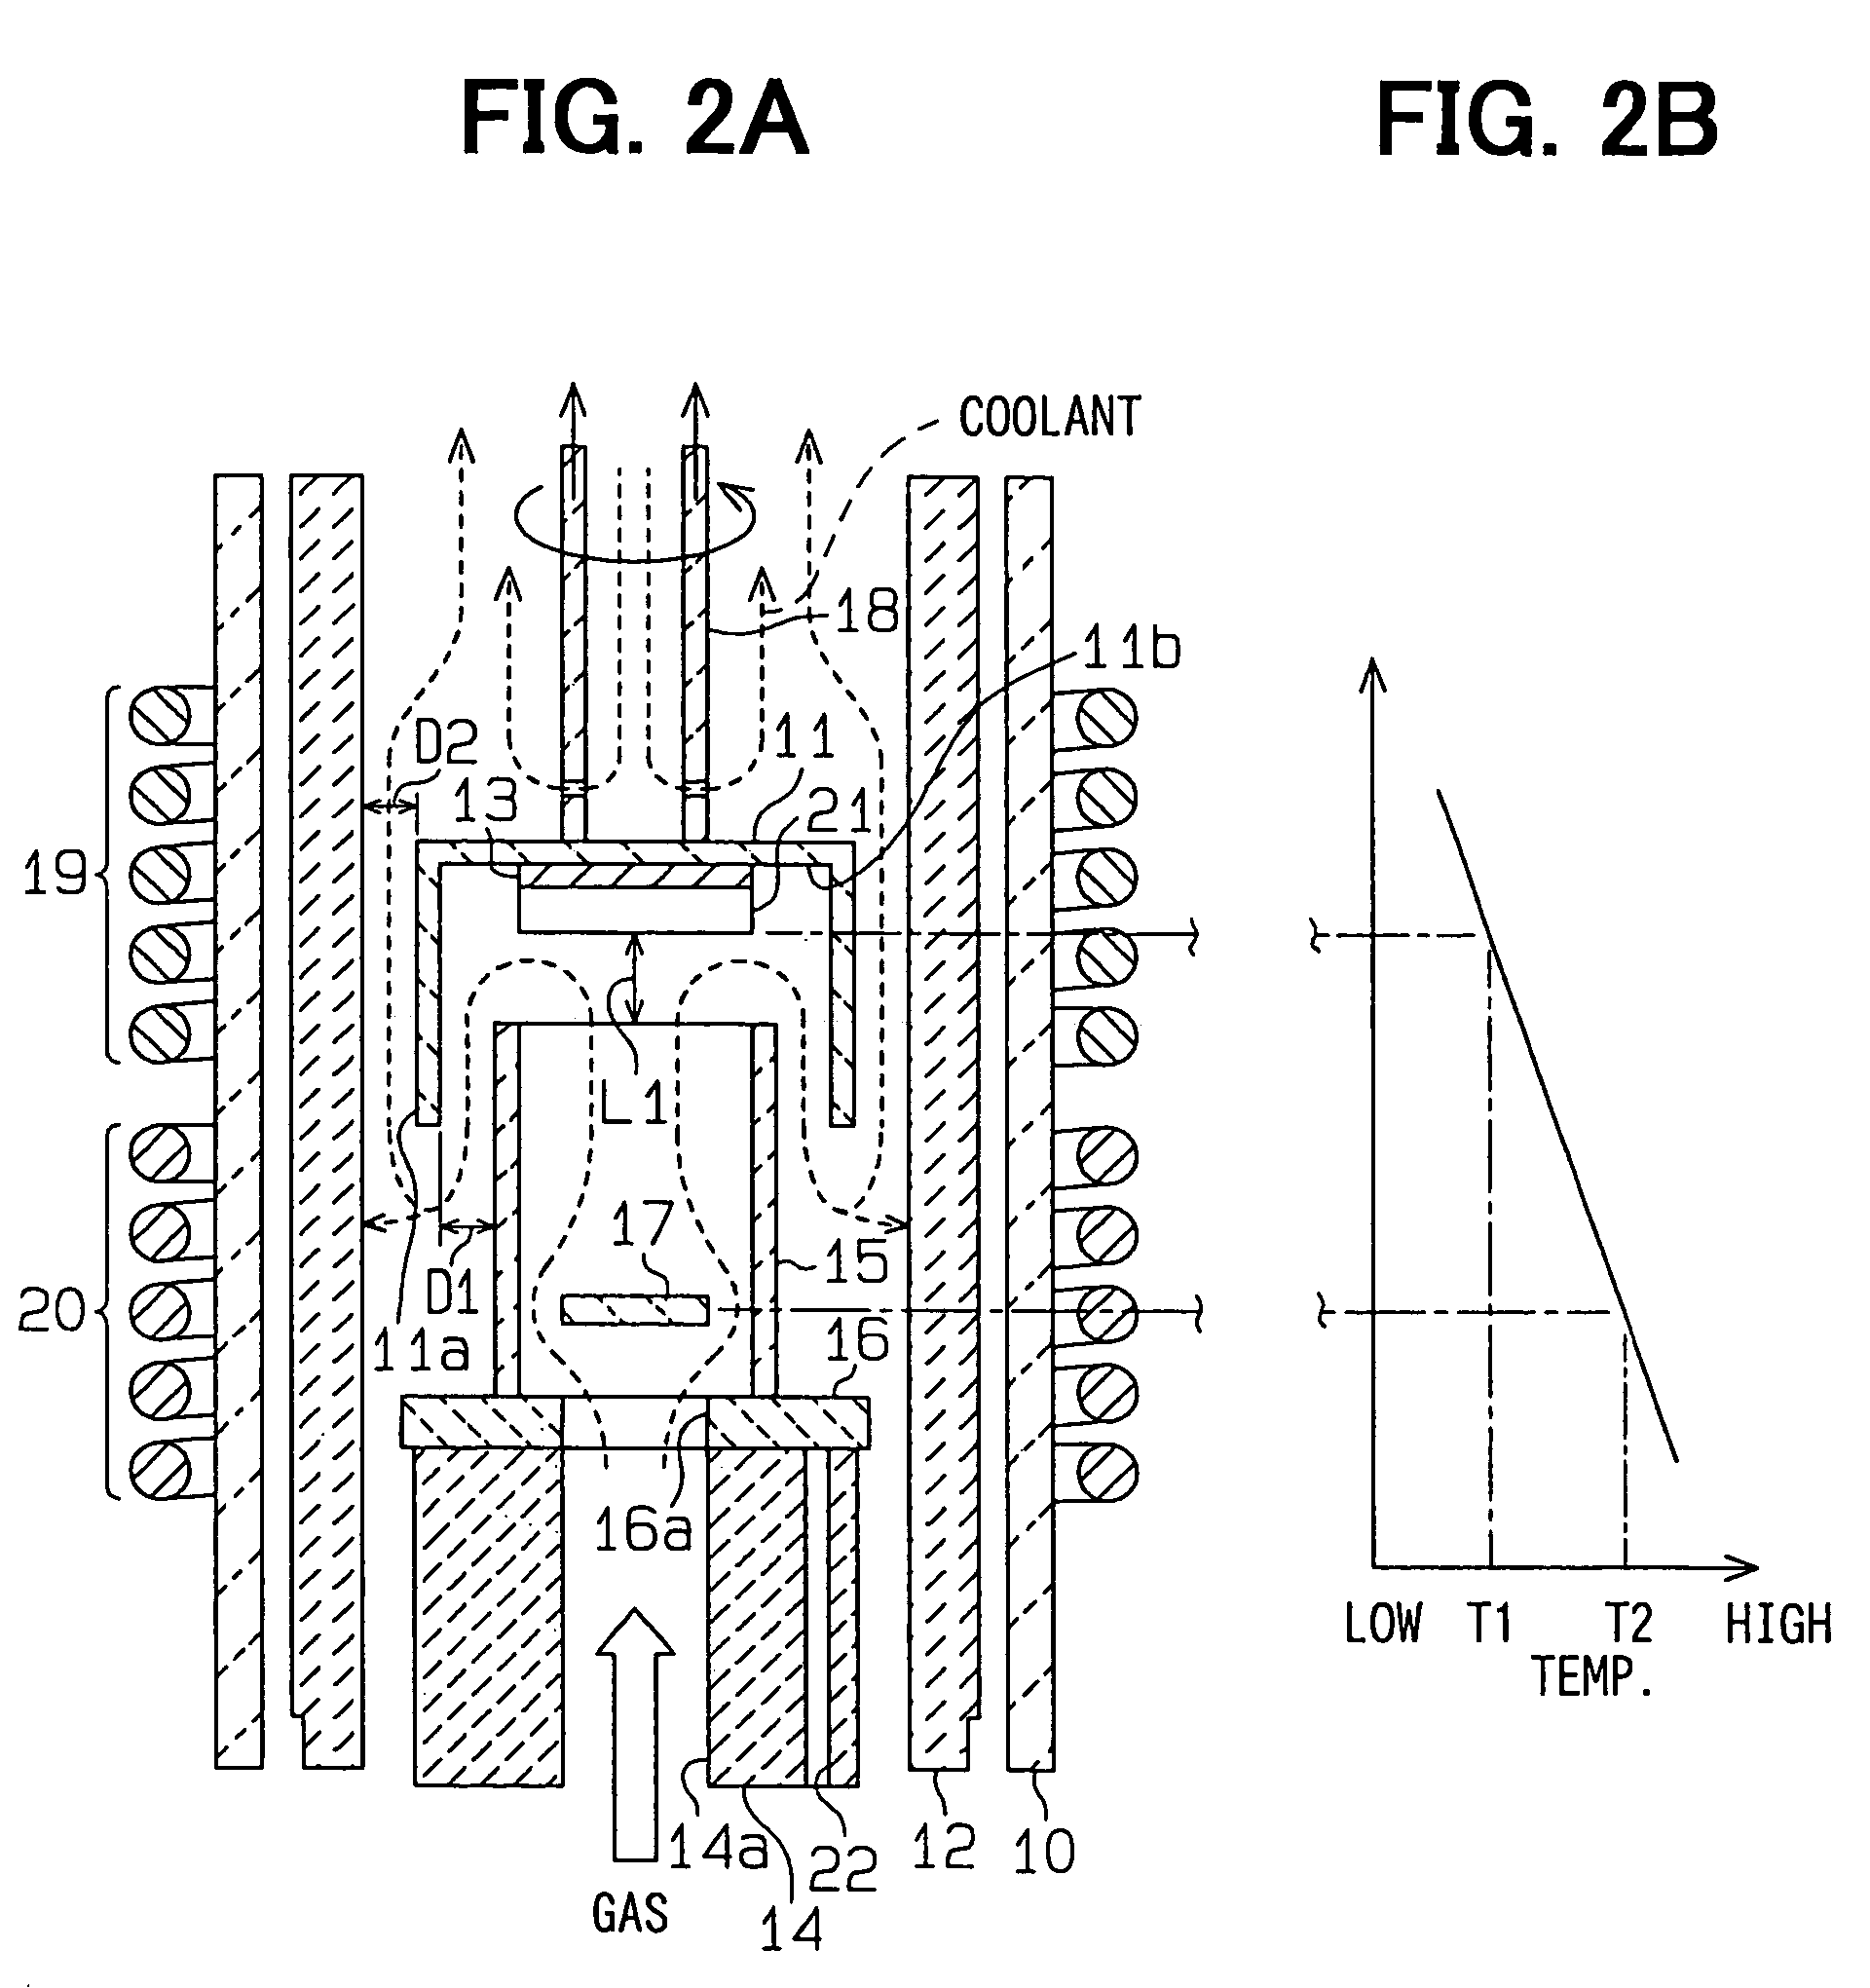 Equipment and method for manufacturing silicon carbide single crystal